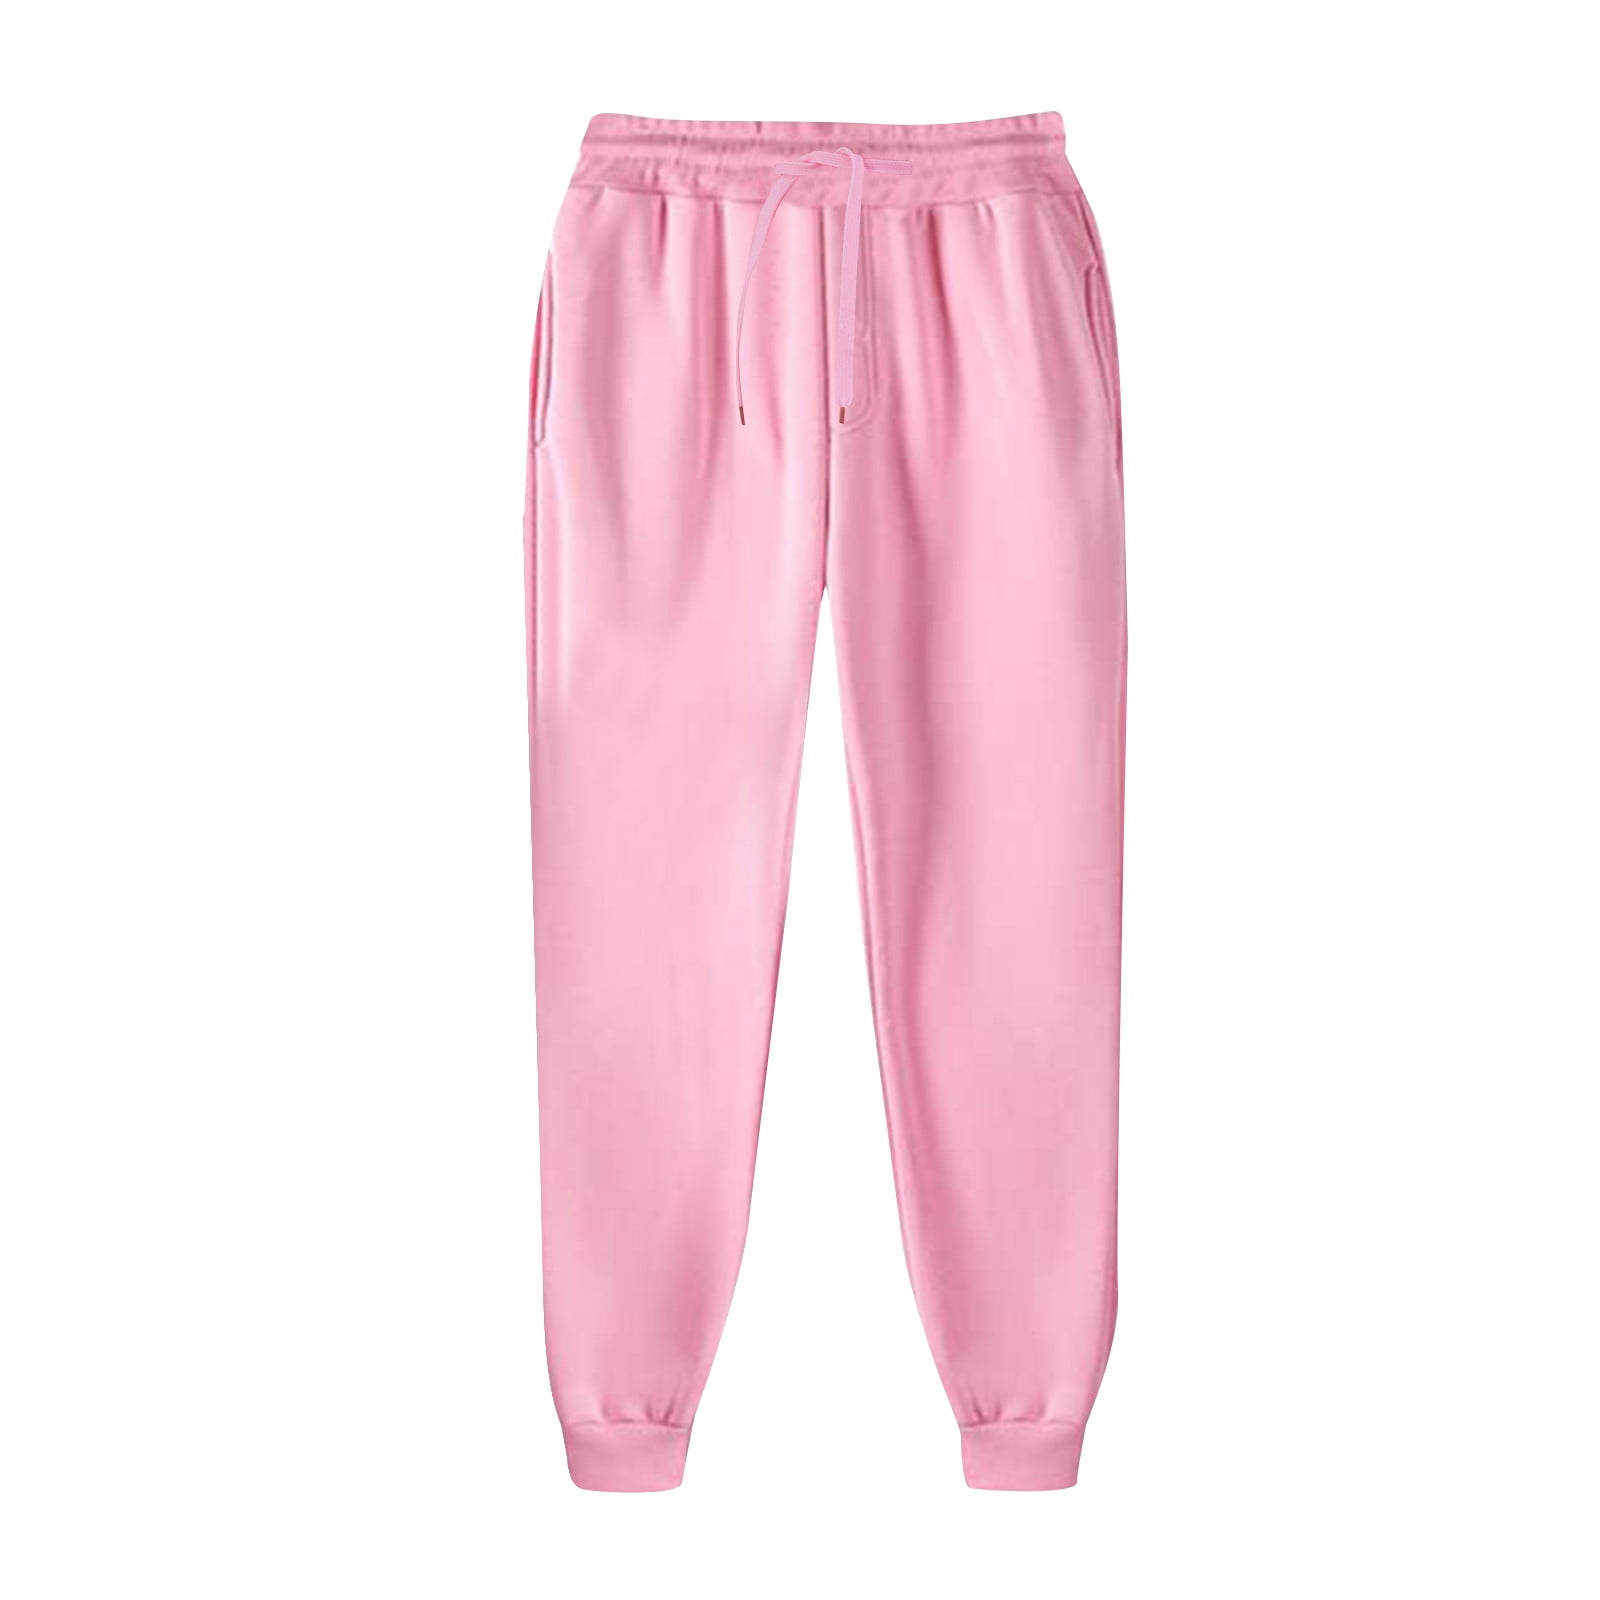 kpoplk Mens Pants Casual,Mens Sweatpants With Pockets and Elastic Bottom  Joggers Lightweight Loose Fit Workout Sweatpants(Pink,XL) 